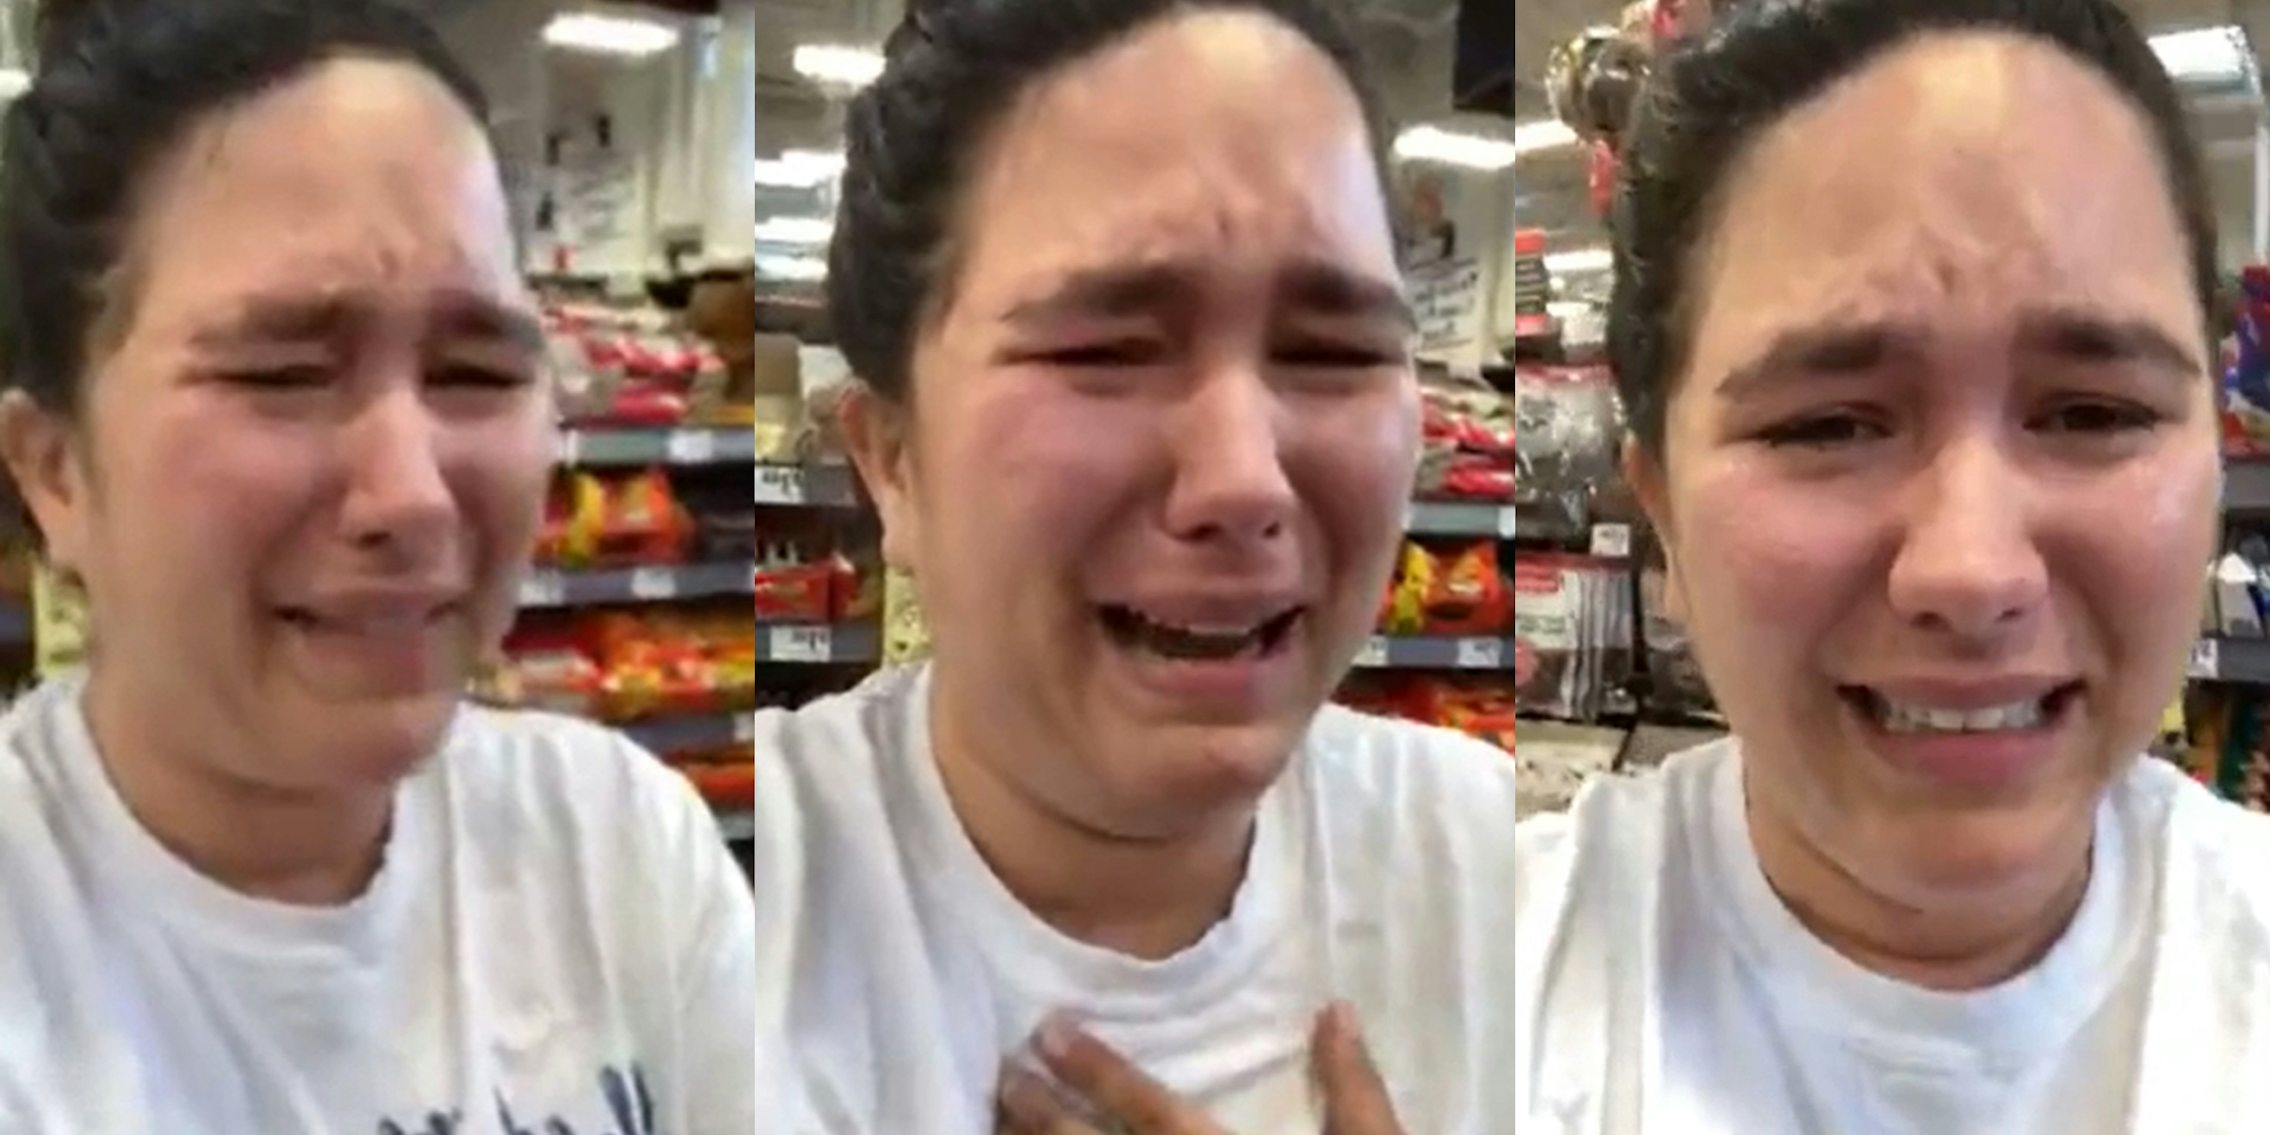 woman wearing 'shed the mask' shirt has a meltdown at HEB after being denied service for not wearing a mask